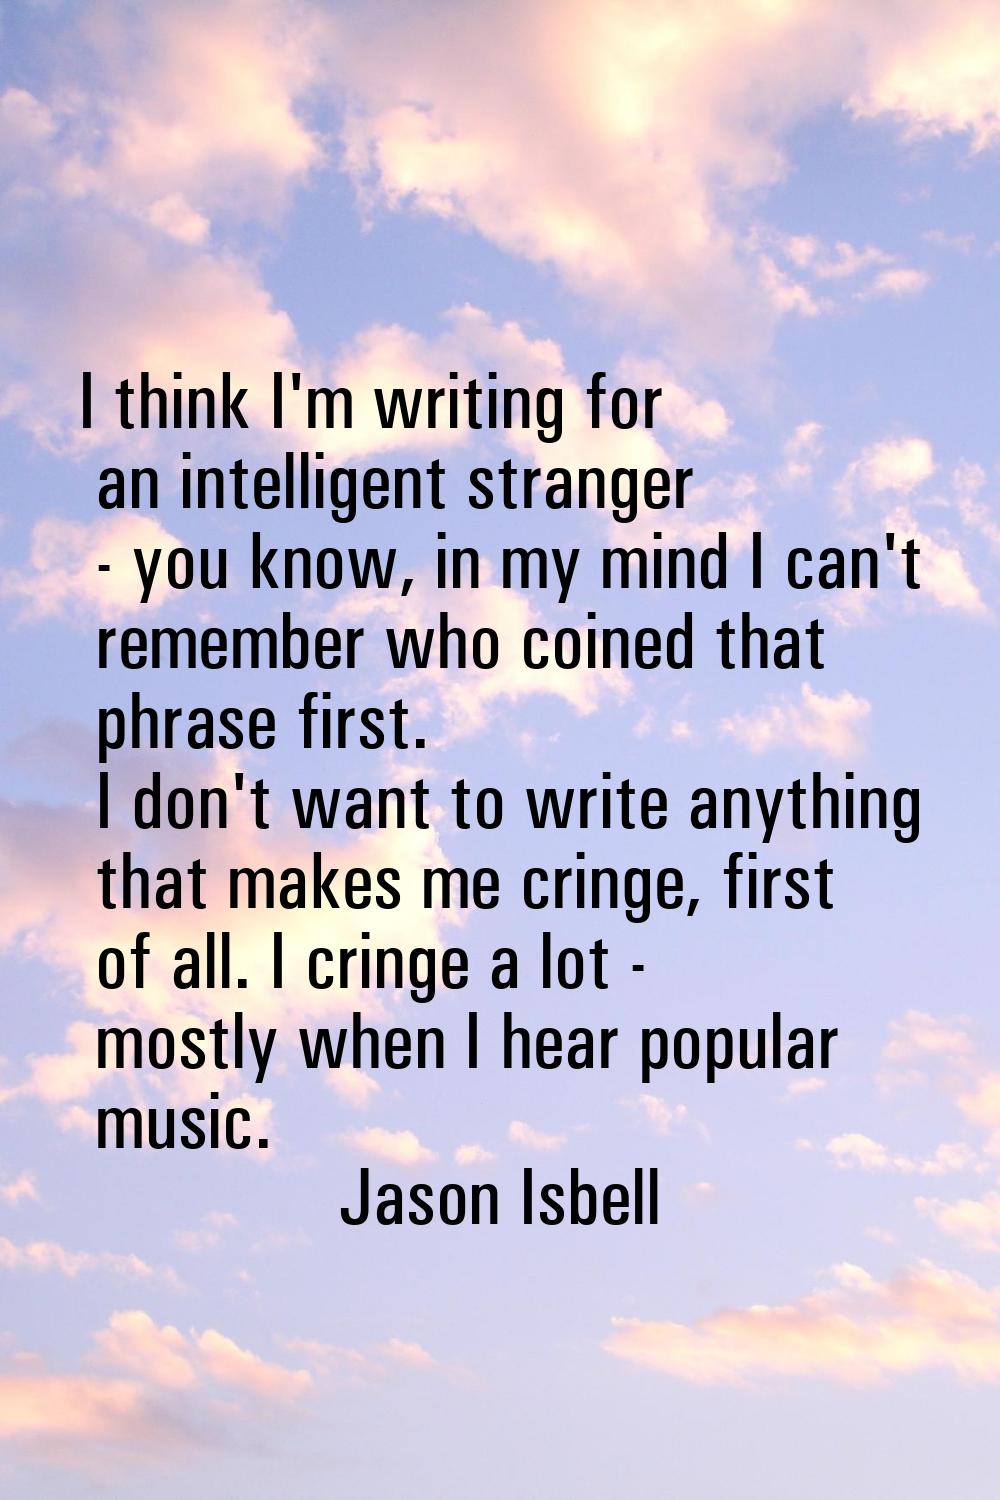 I think I'm writing for an intelligent stranger - you know, in my mind I can't remember who coined 